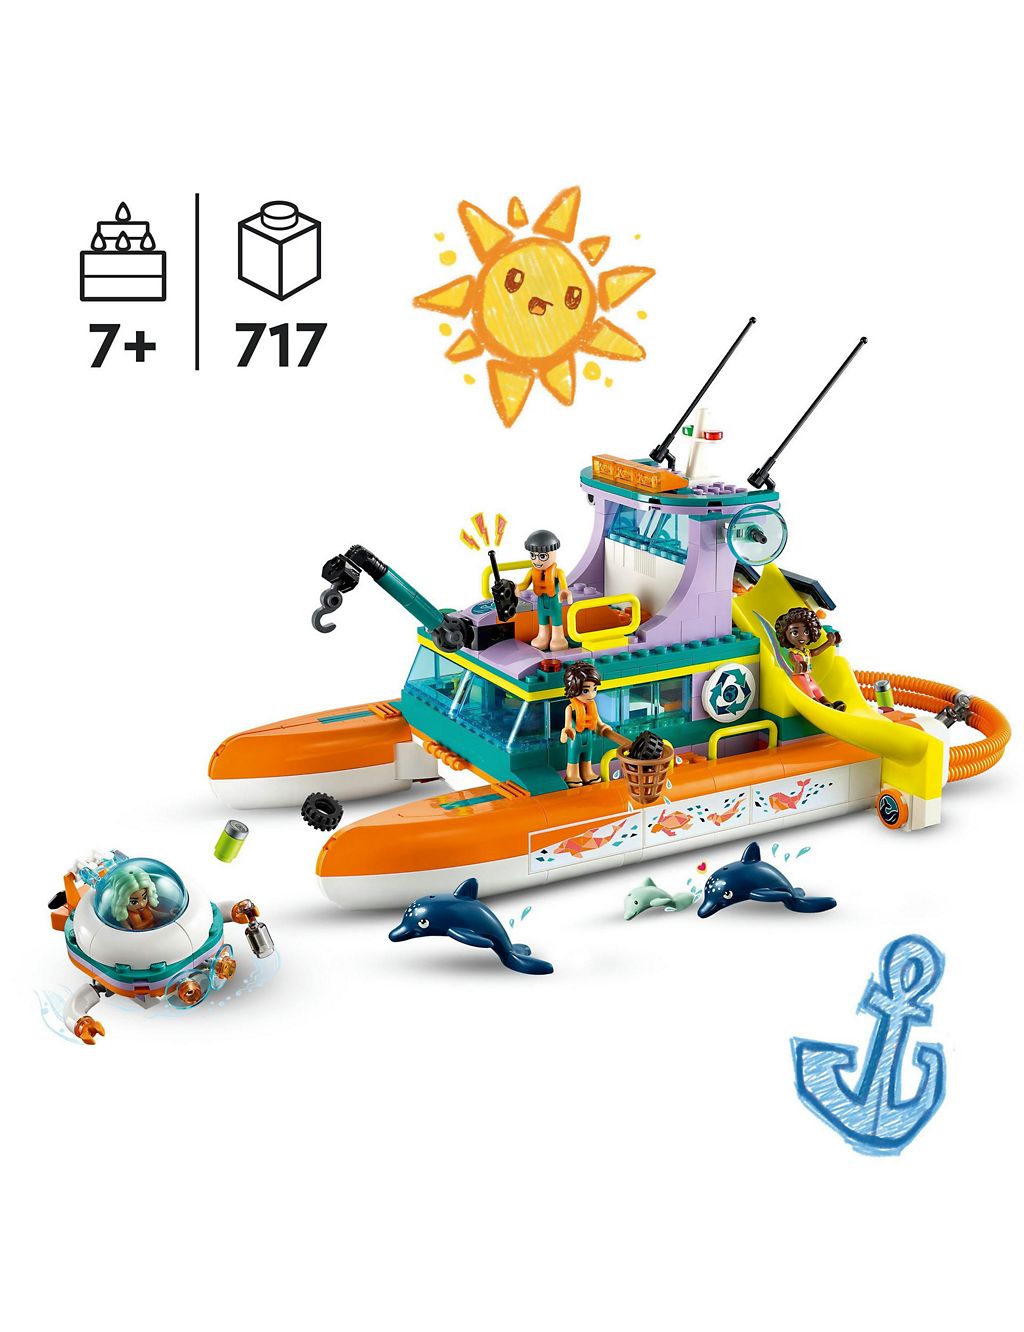 LEGO Friends Sea Rescue Boat Toy Playset 41734 (7+ Yrs) 1 of 6